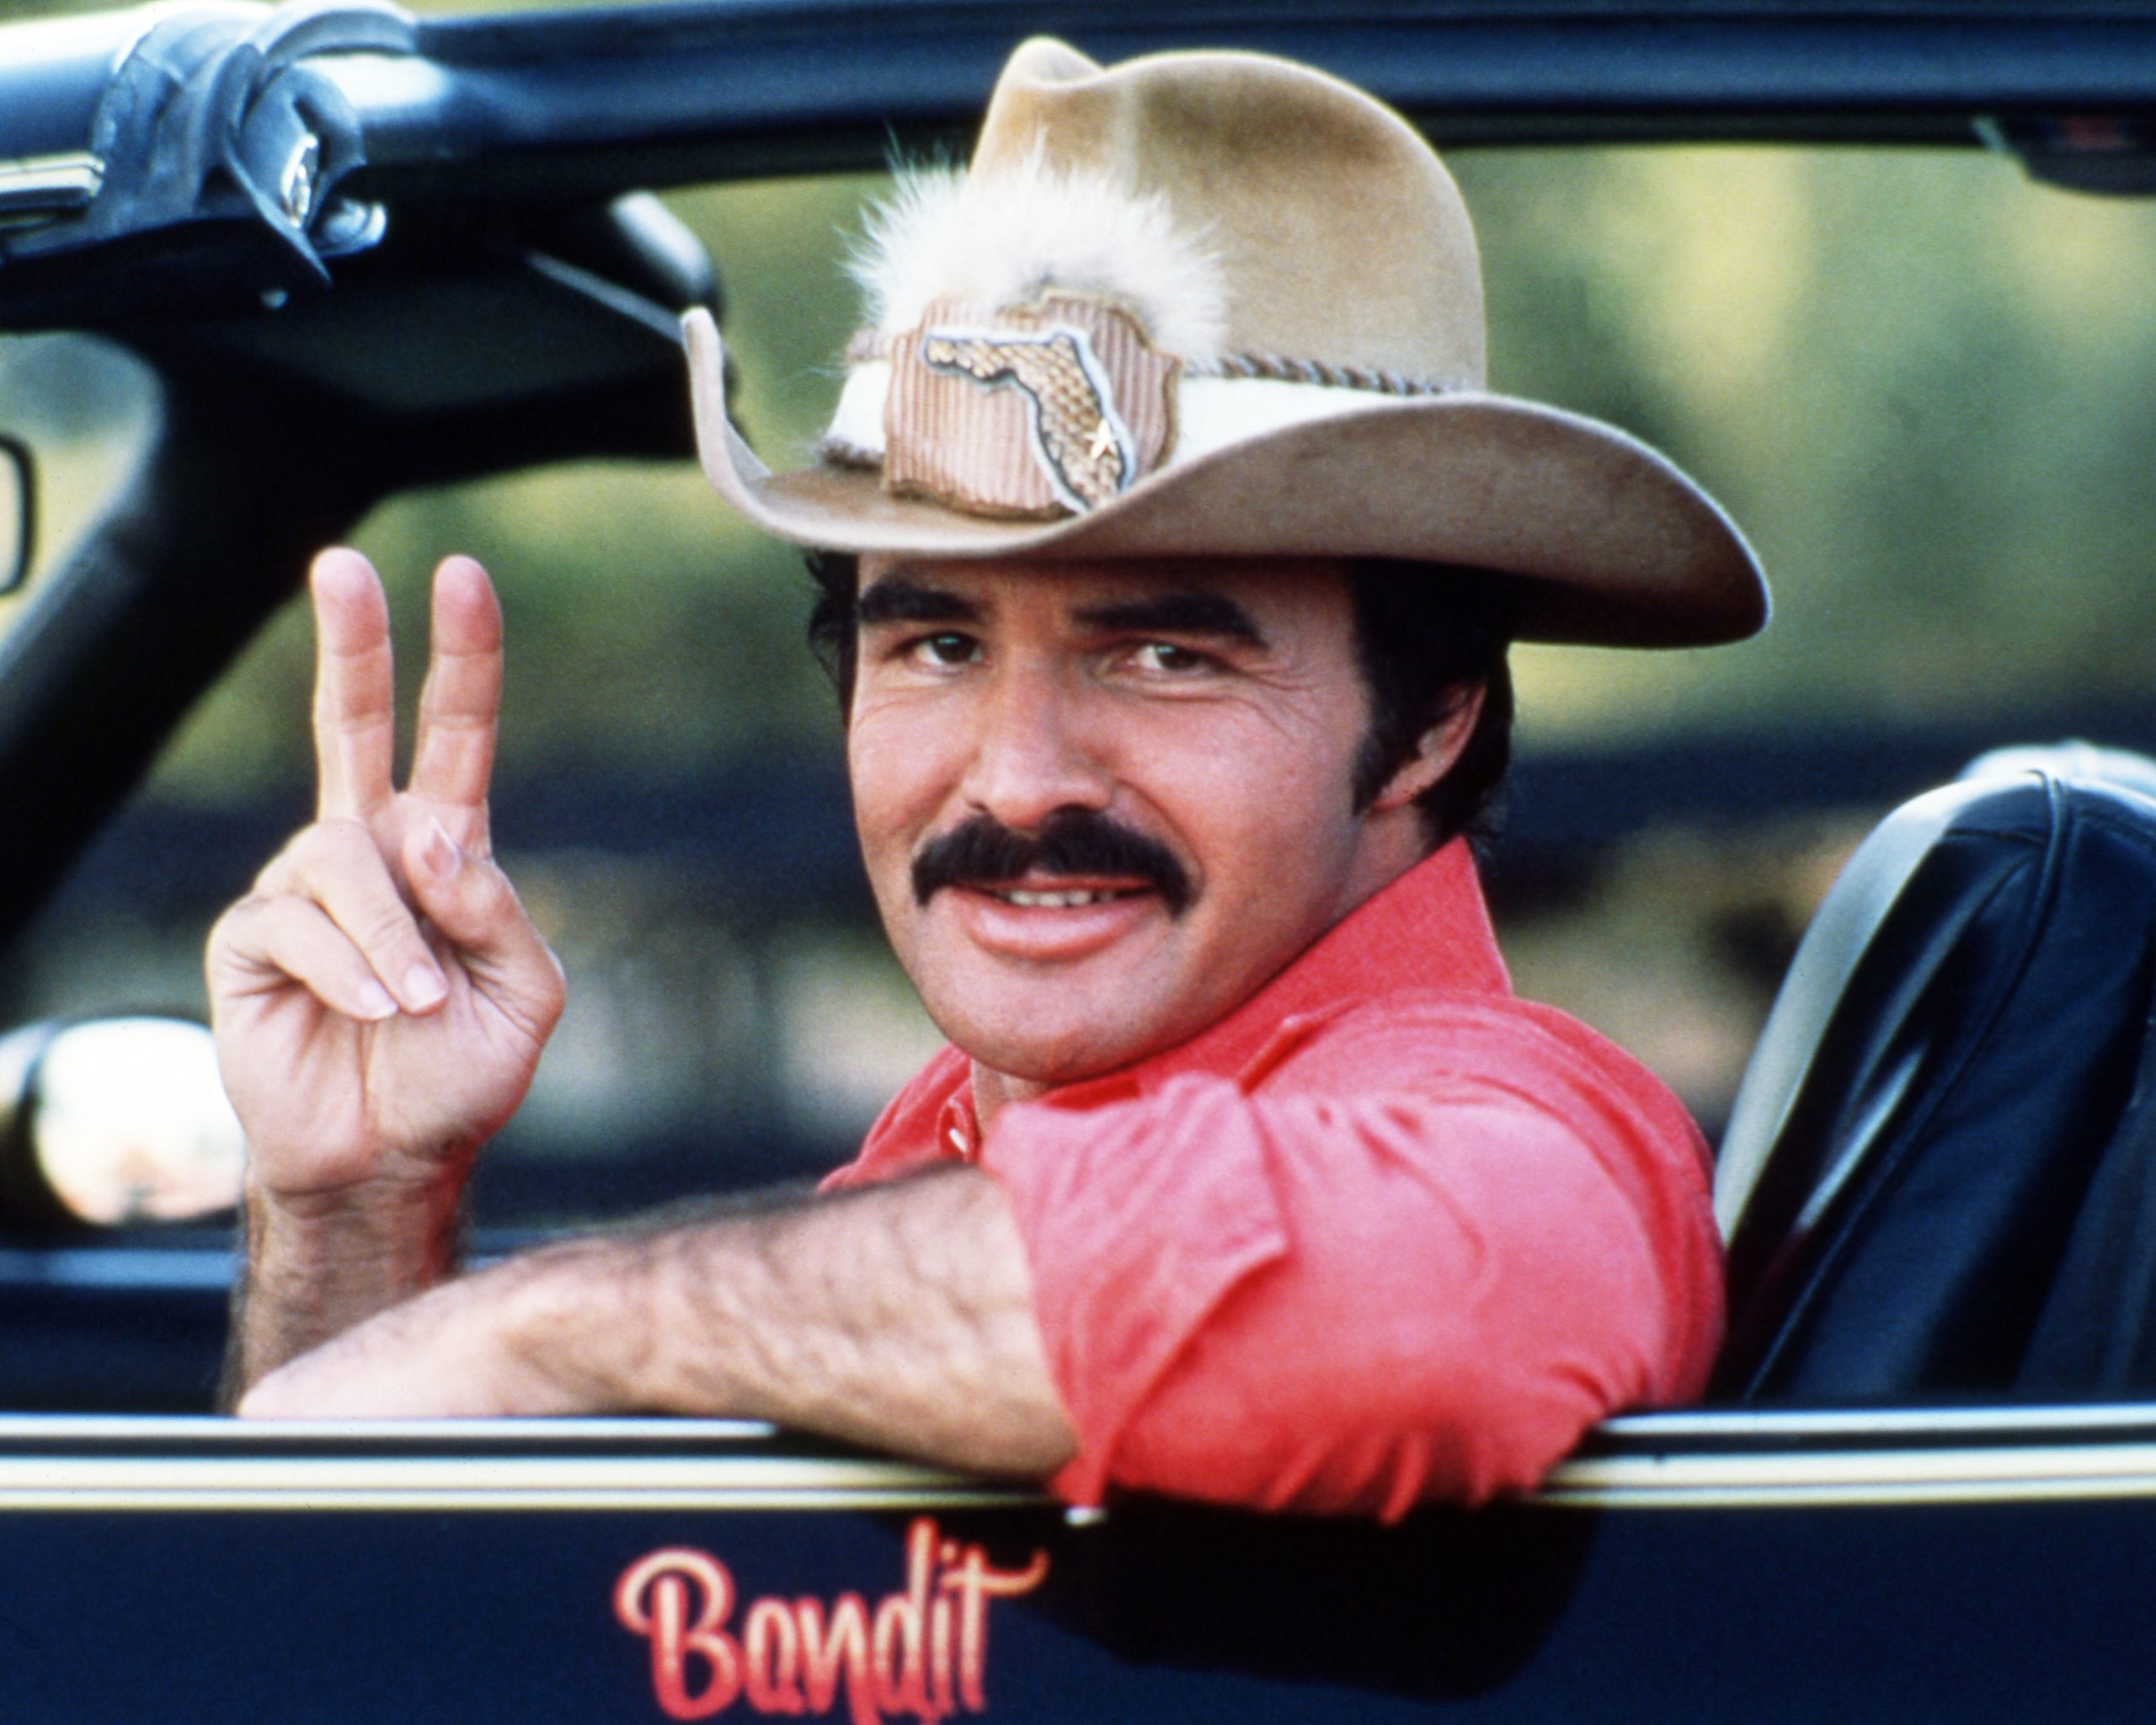 Smokey and the Bandit propelled Pontiac's Trans Am to stardom and sales